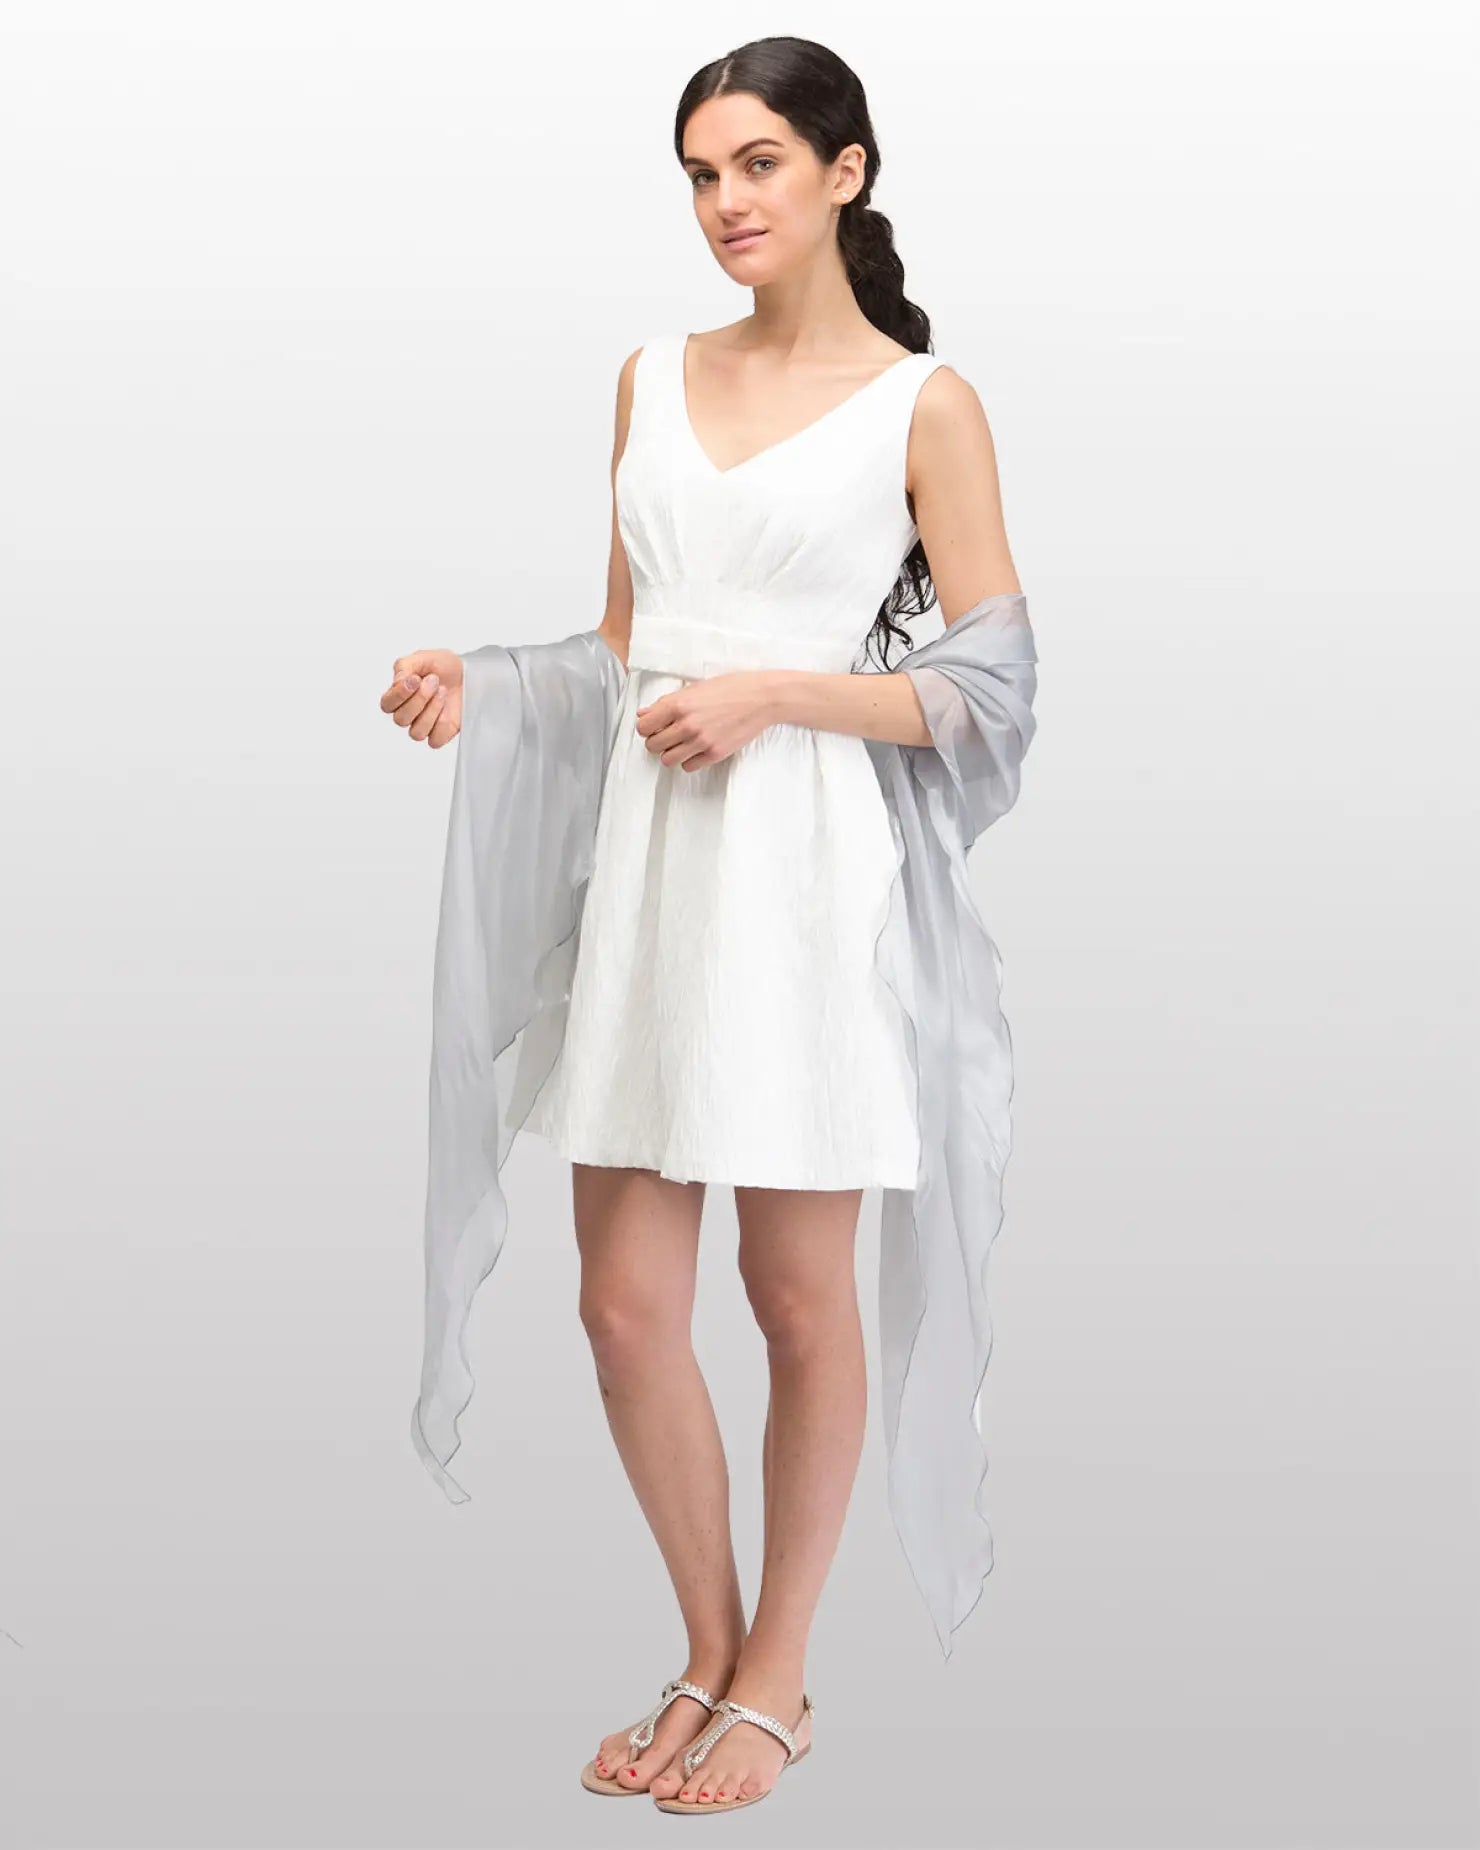 Sheer shimmer evening lightweight stole with woman in white dress.